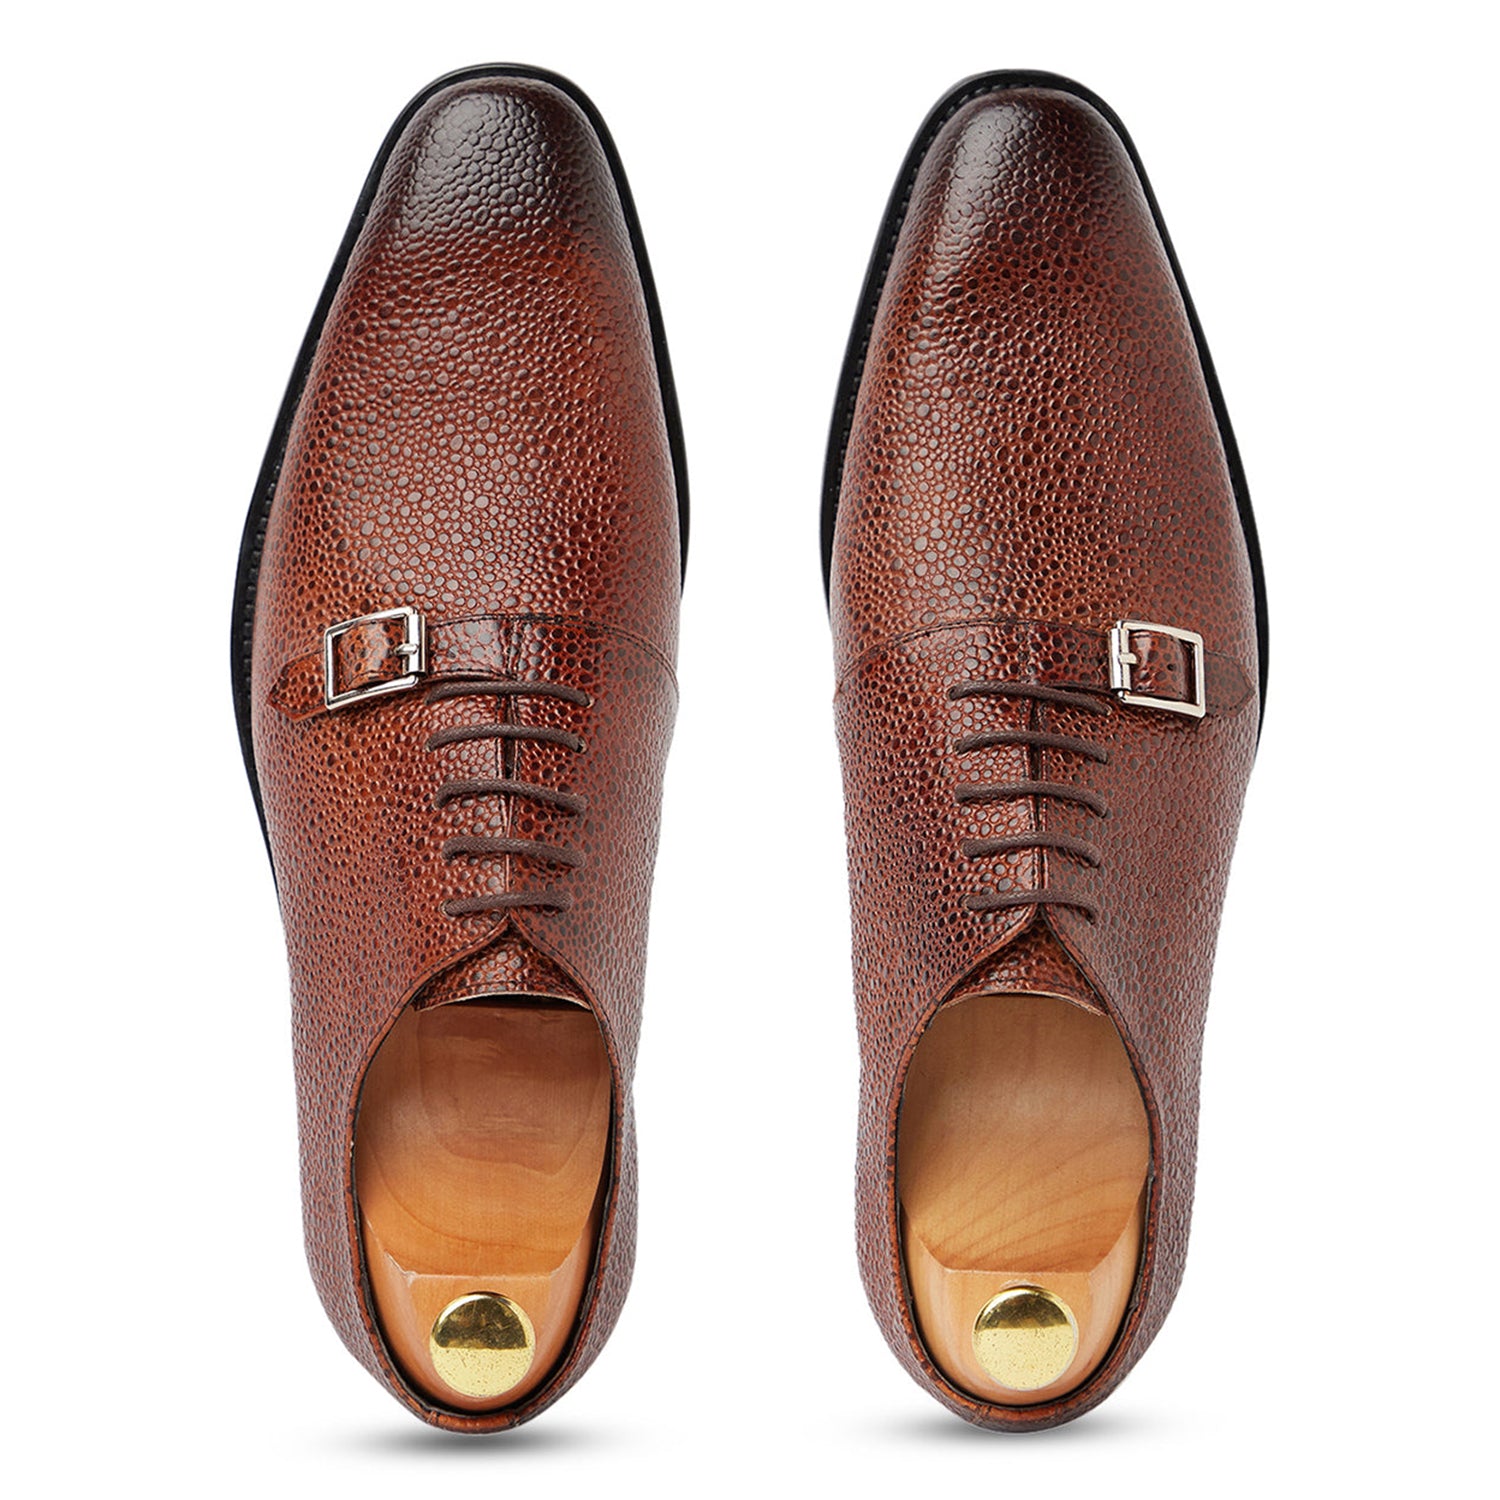 Stingray Leather Oxford Brown Shoes